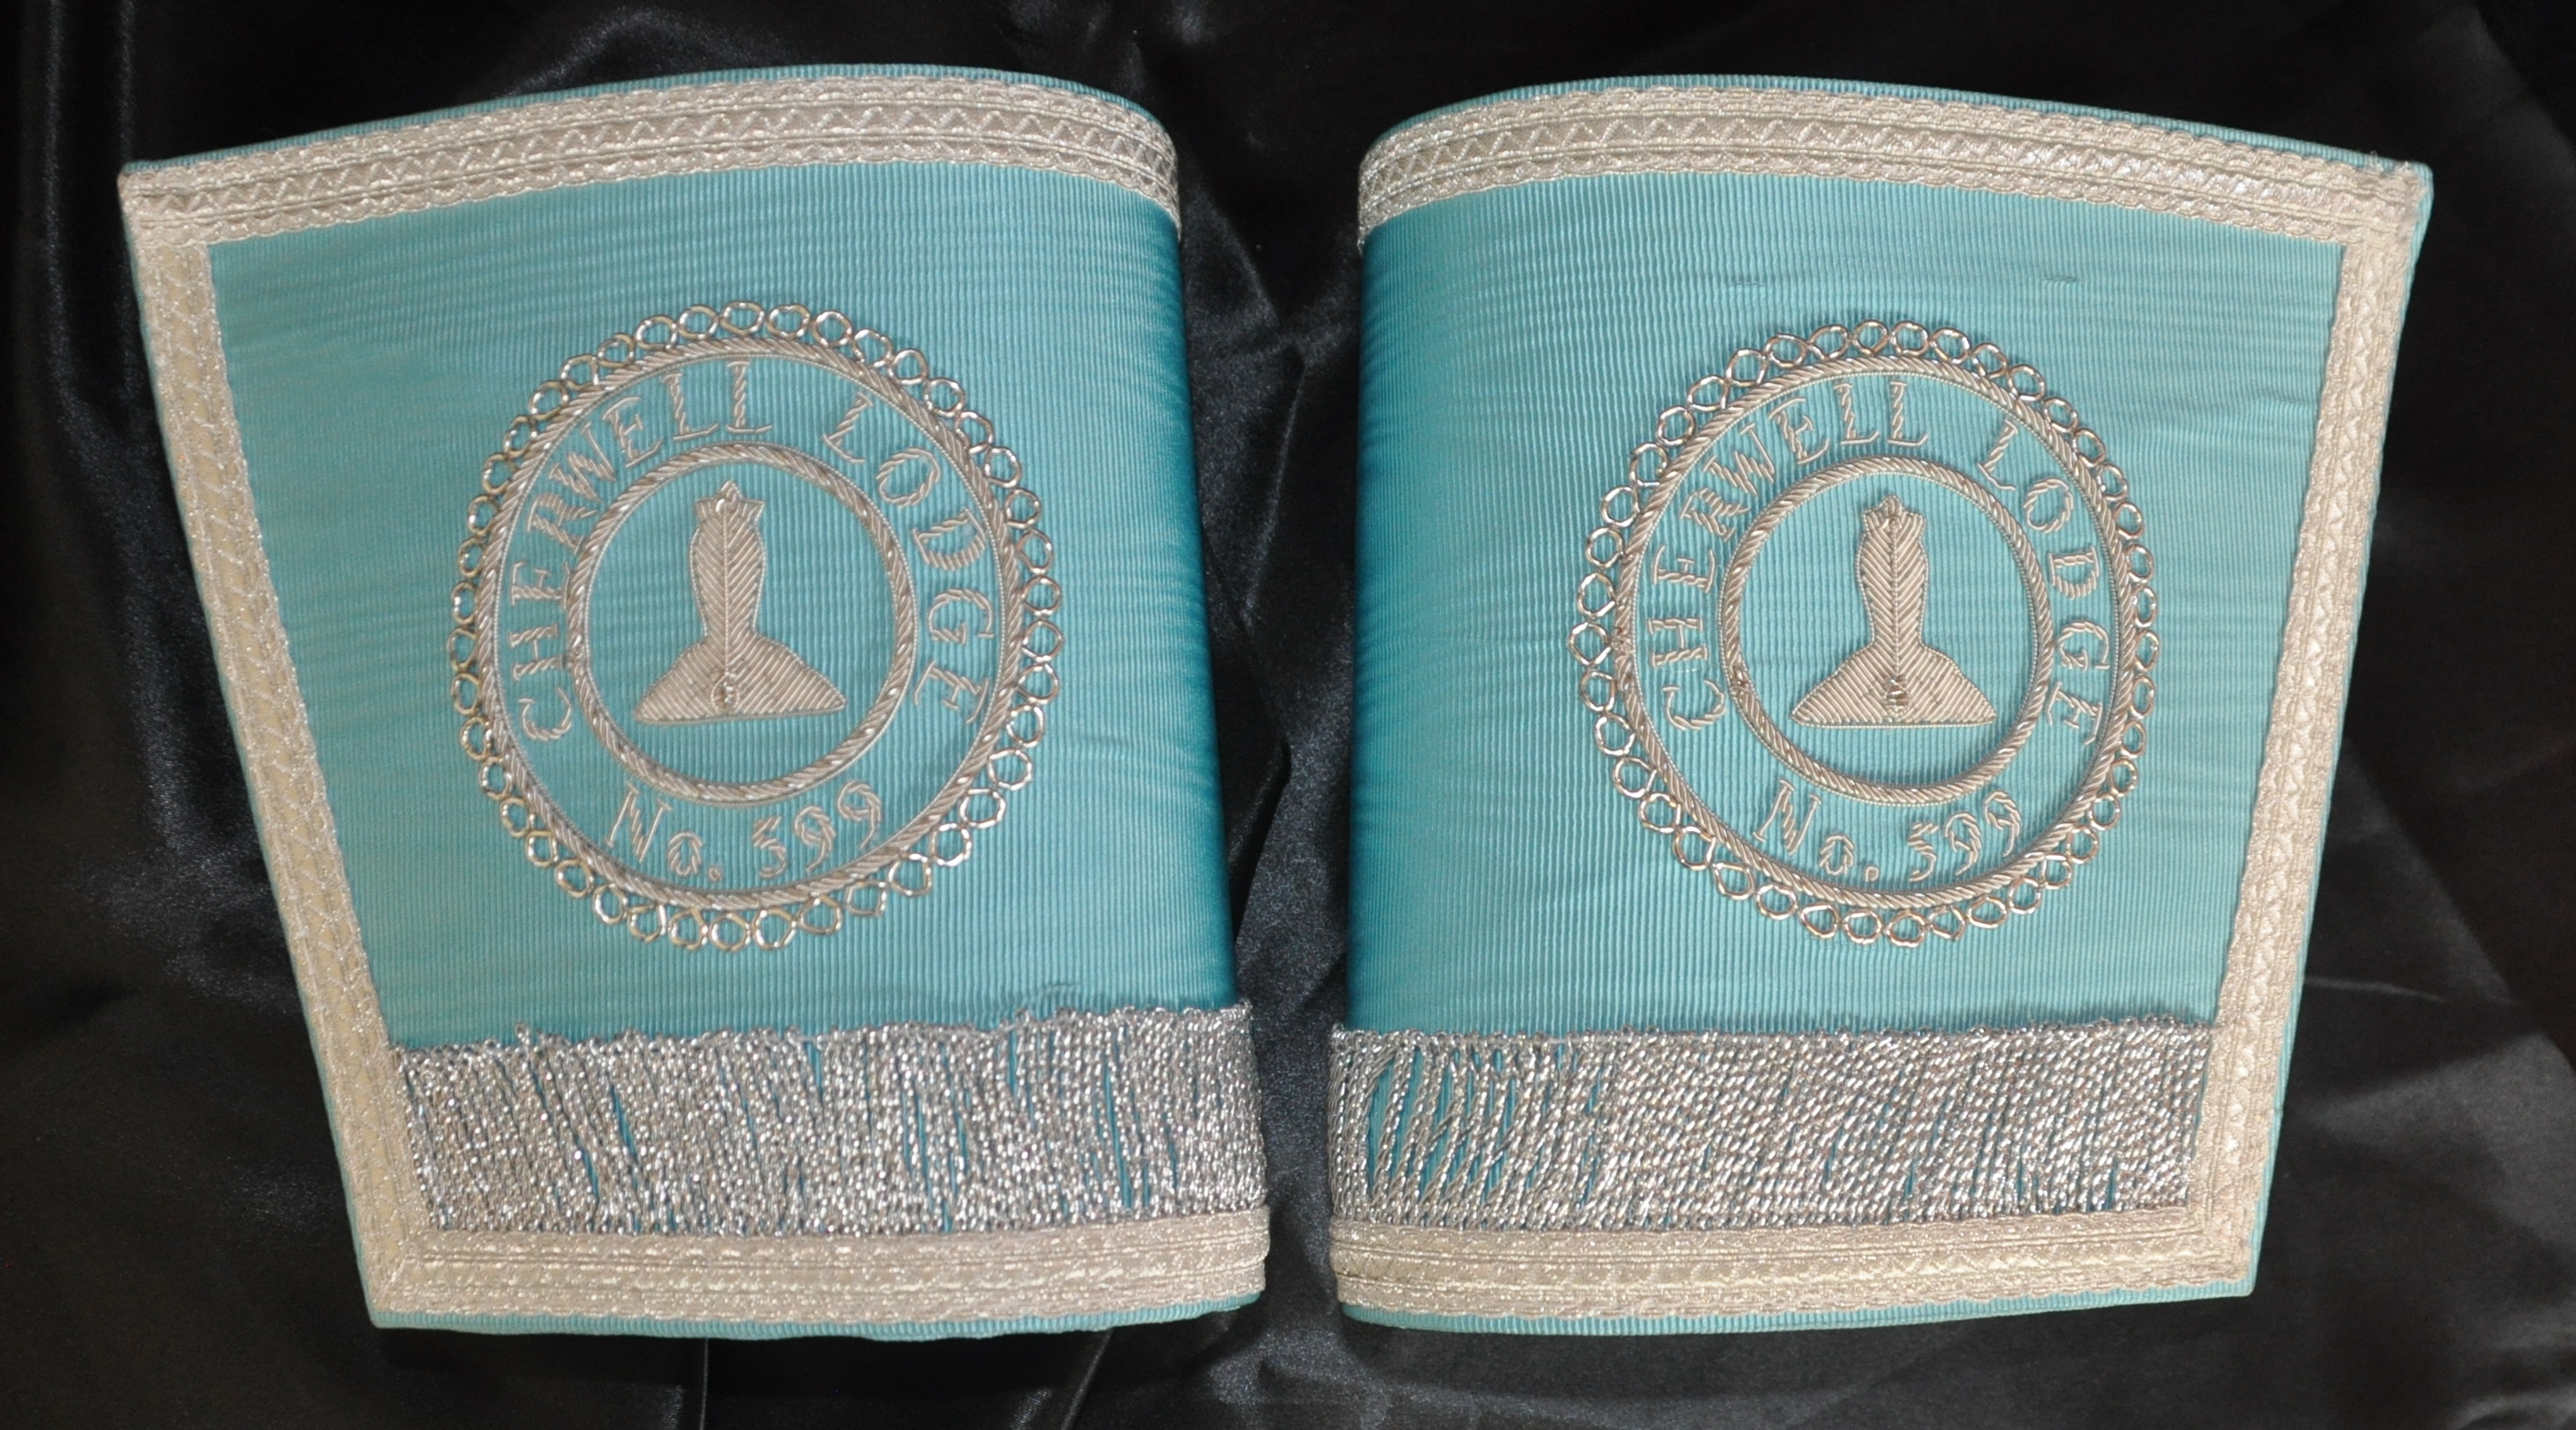 Craft Lodge Officers Gauntlets with Lodge Name & No. - Click Image to Close